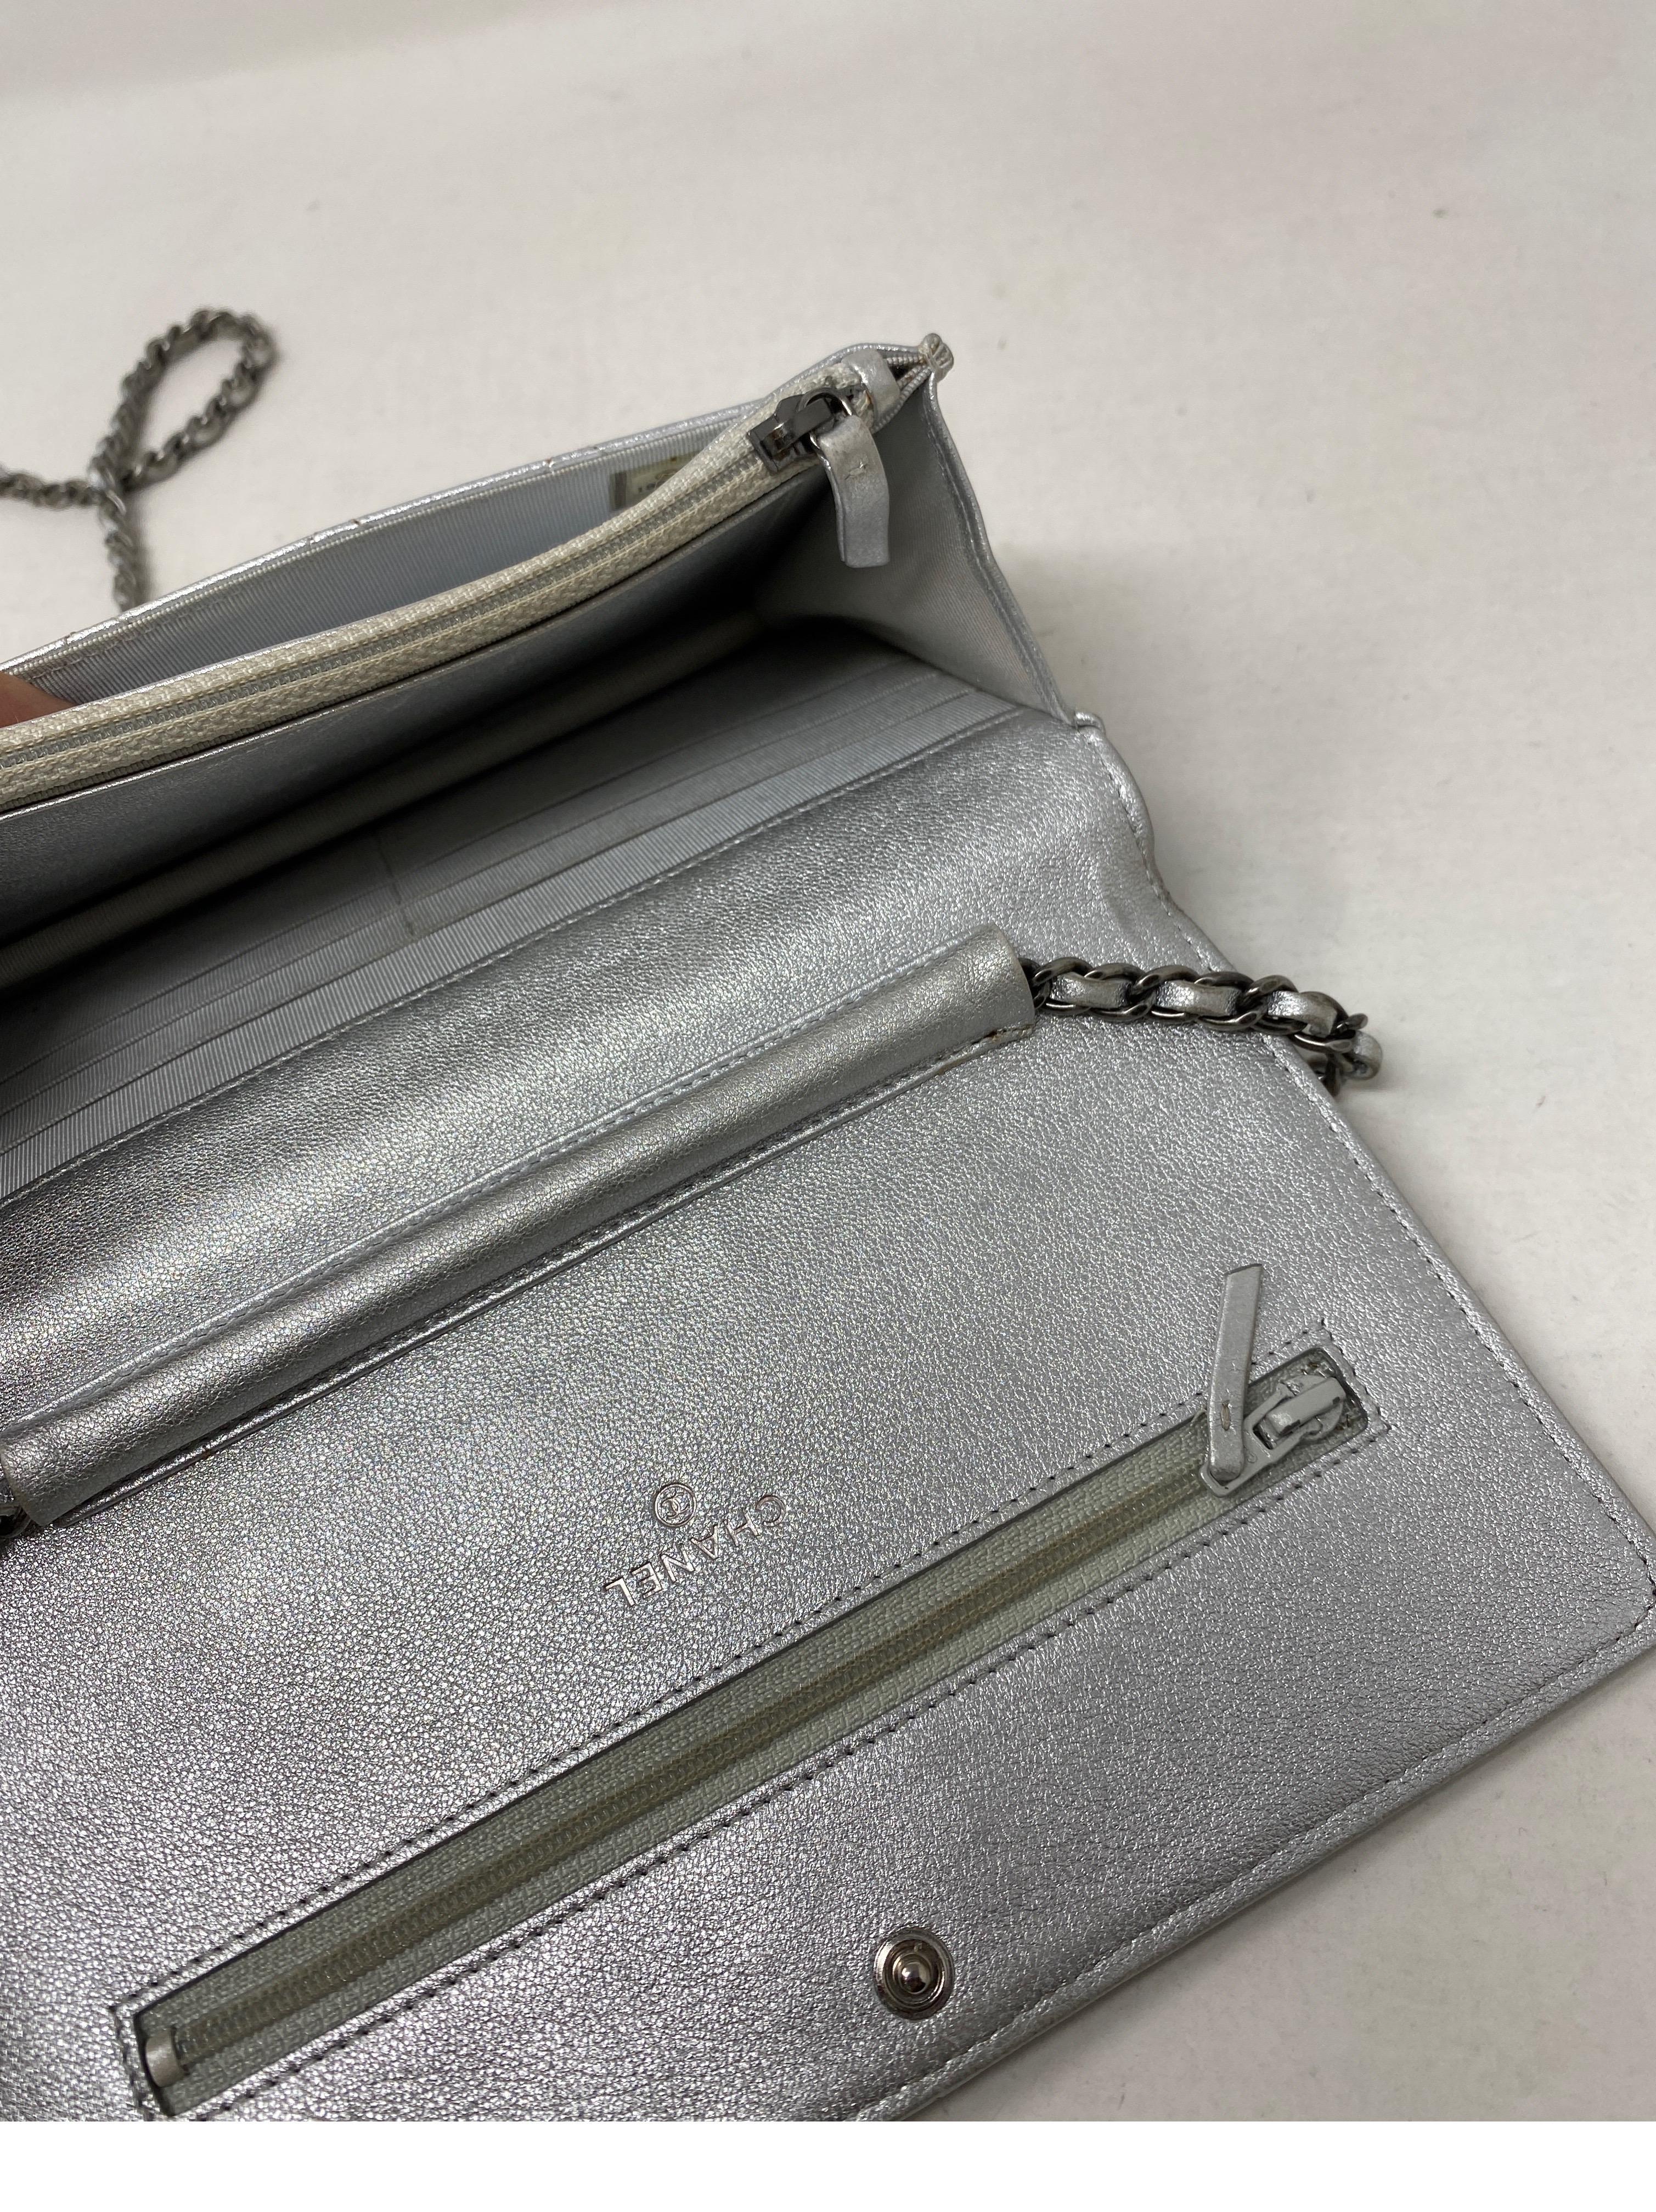 Chanel Silver Reissue Wallet On A Chain Bag 6